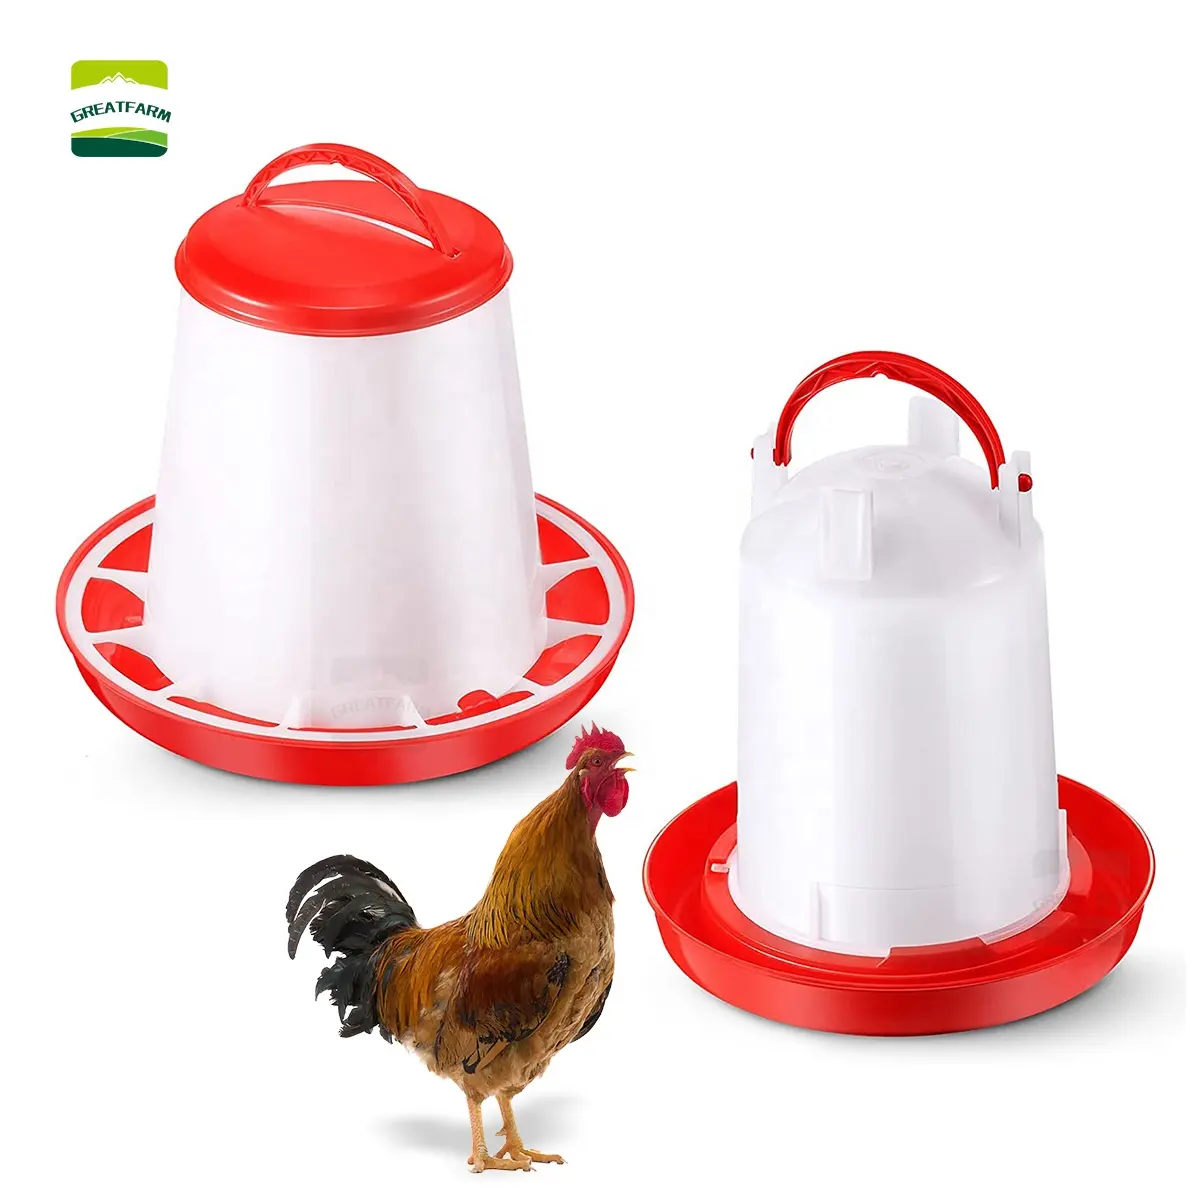 GREAT FARM Poultry Farm Equipment 1-15L Automatic Chicken Feeder Plastic Poultry Drinking and Feeding Container for Sale 100pcs